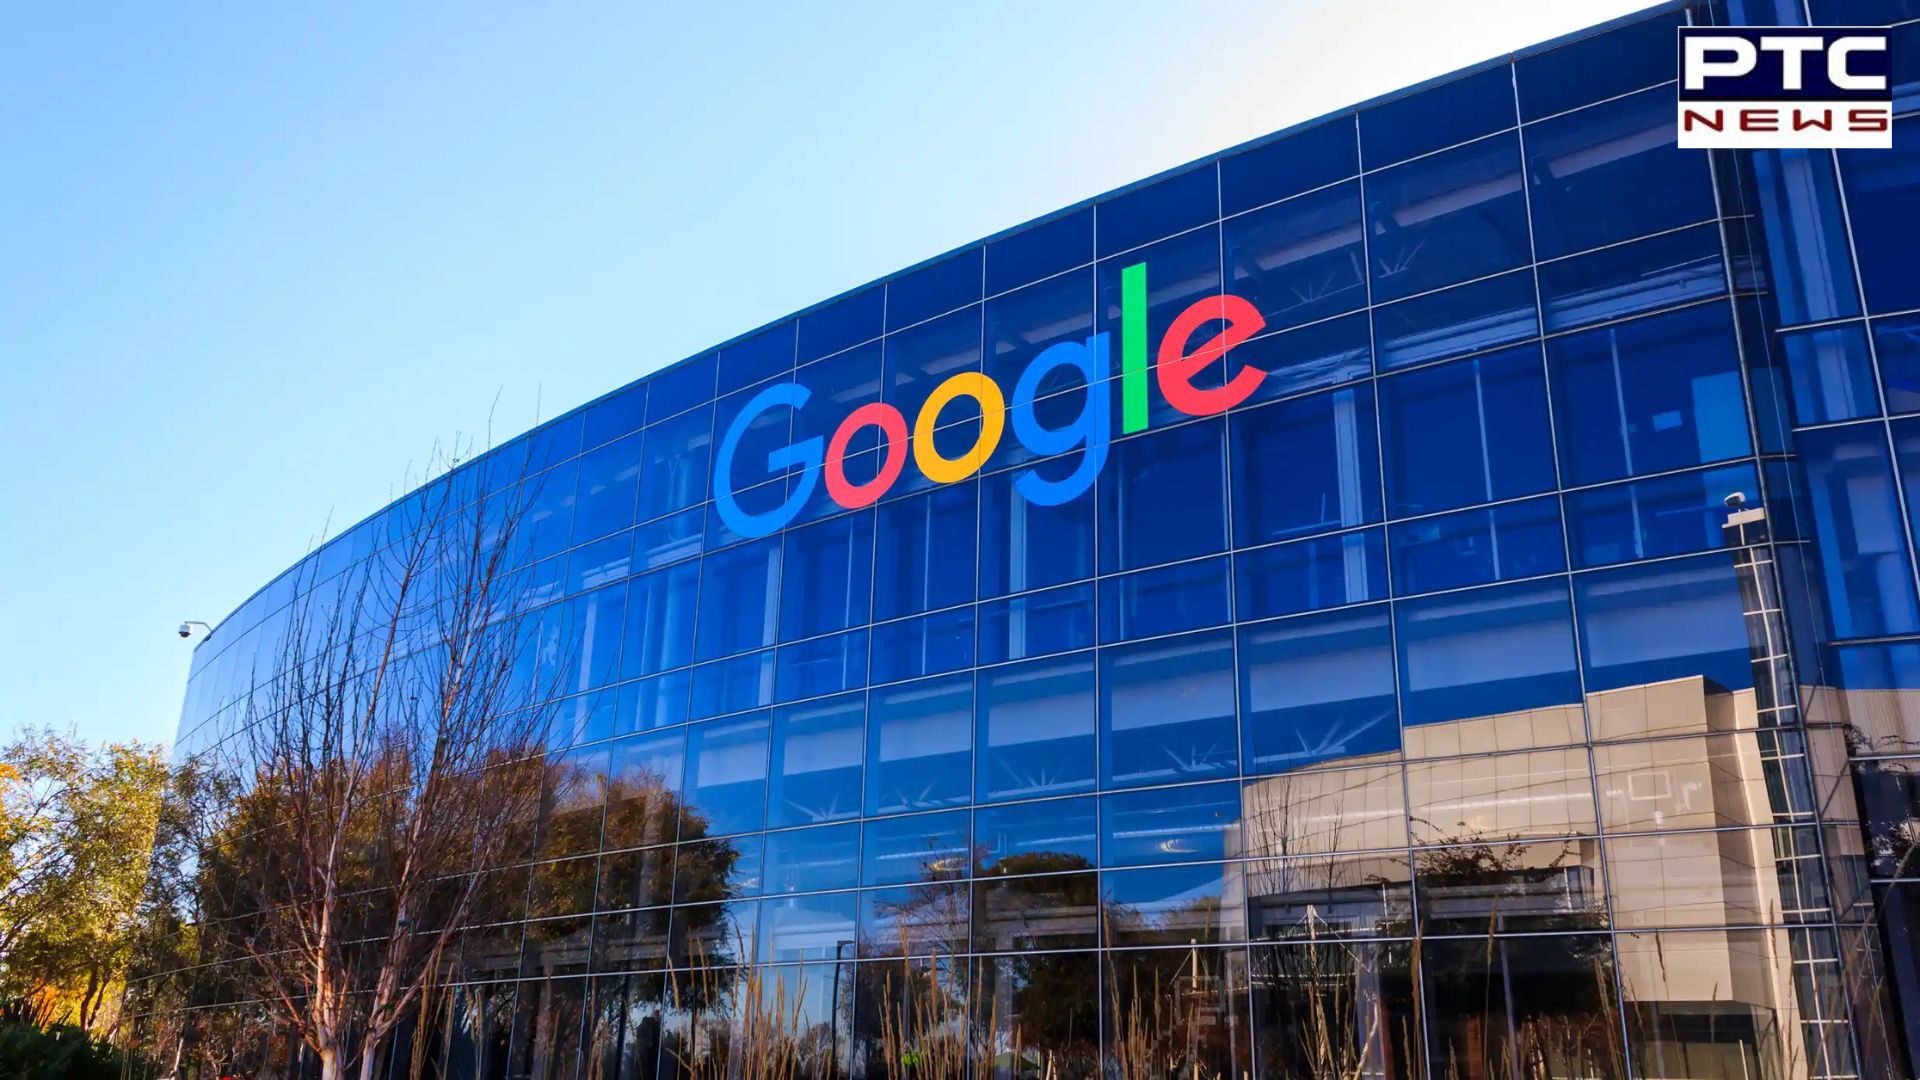 Google resolves Rs 41,000 crore lawsuit over 'incognito' data spying